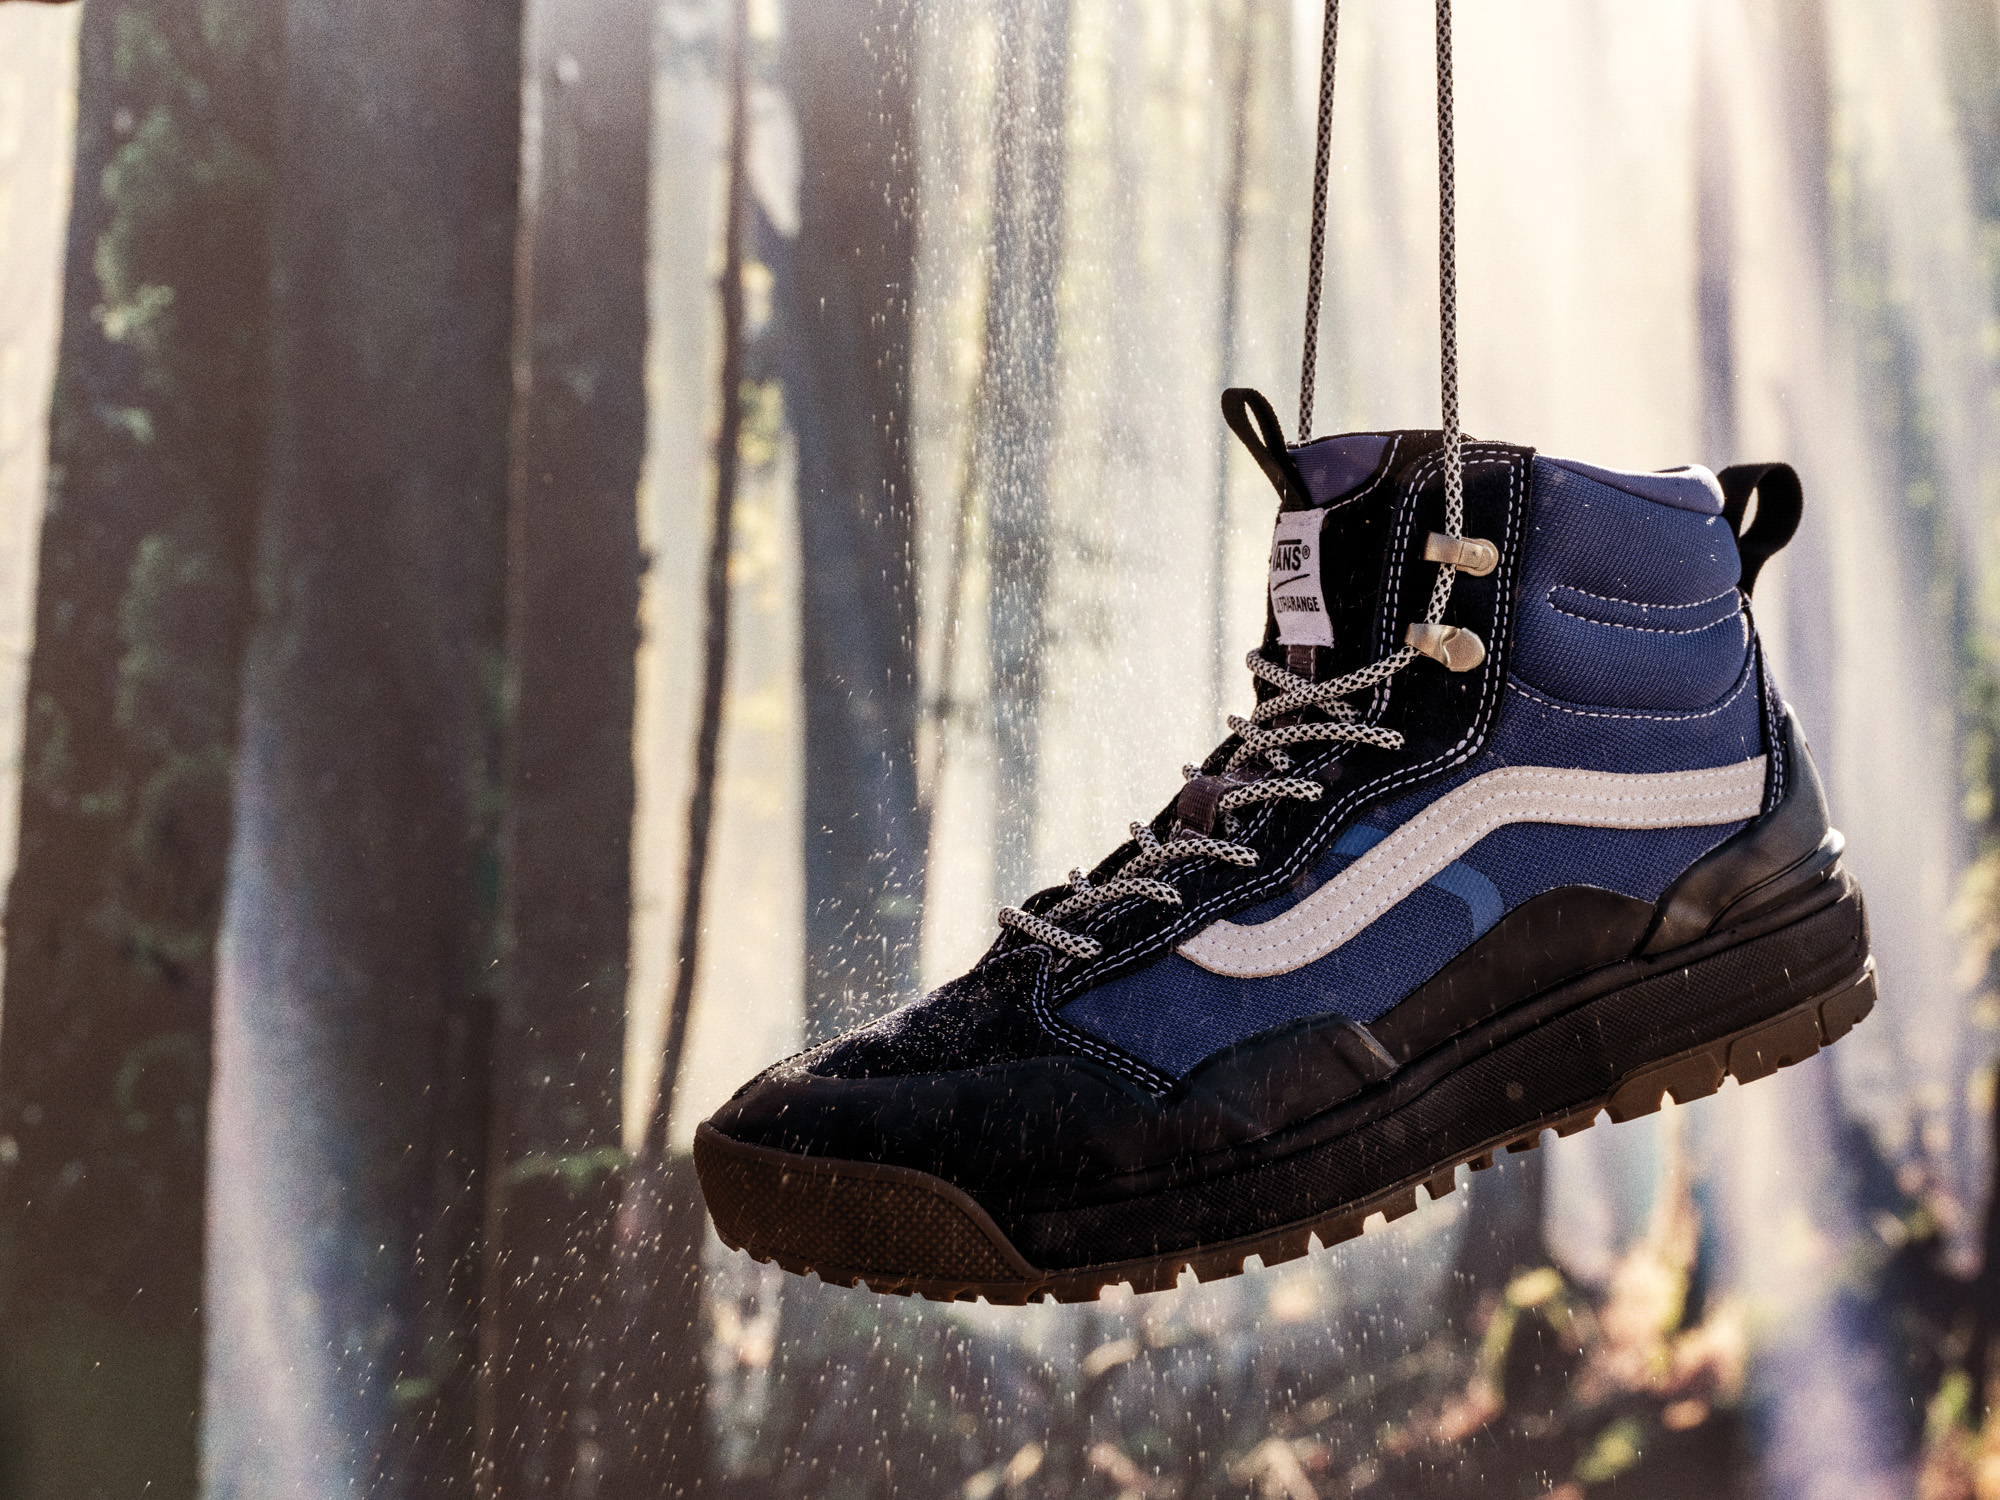 hiking boots: Introducing a warm-weather addition to the - The Manual